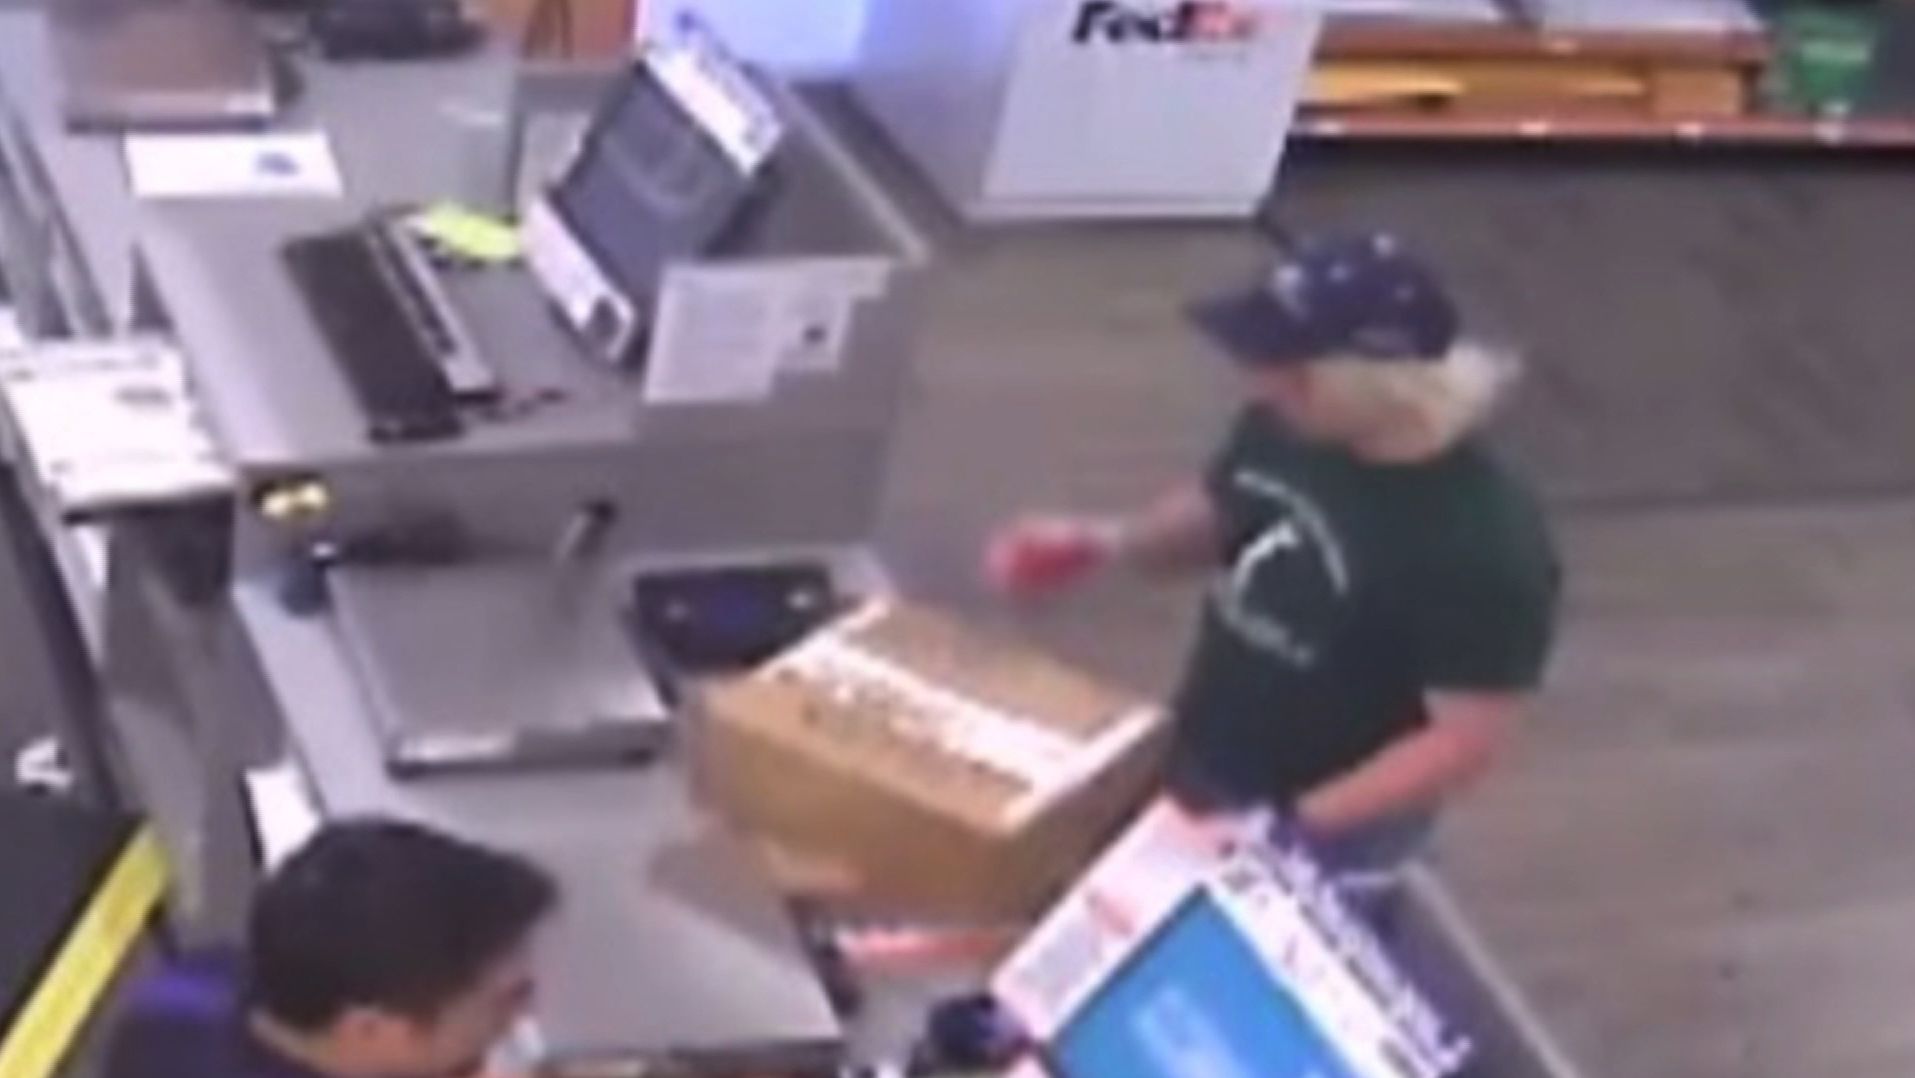 Police believe this is Mark Anthony Conditt, dropping off two suspicious packages on Sunday at a FedEx store.